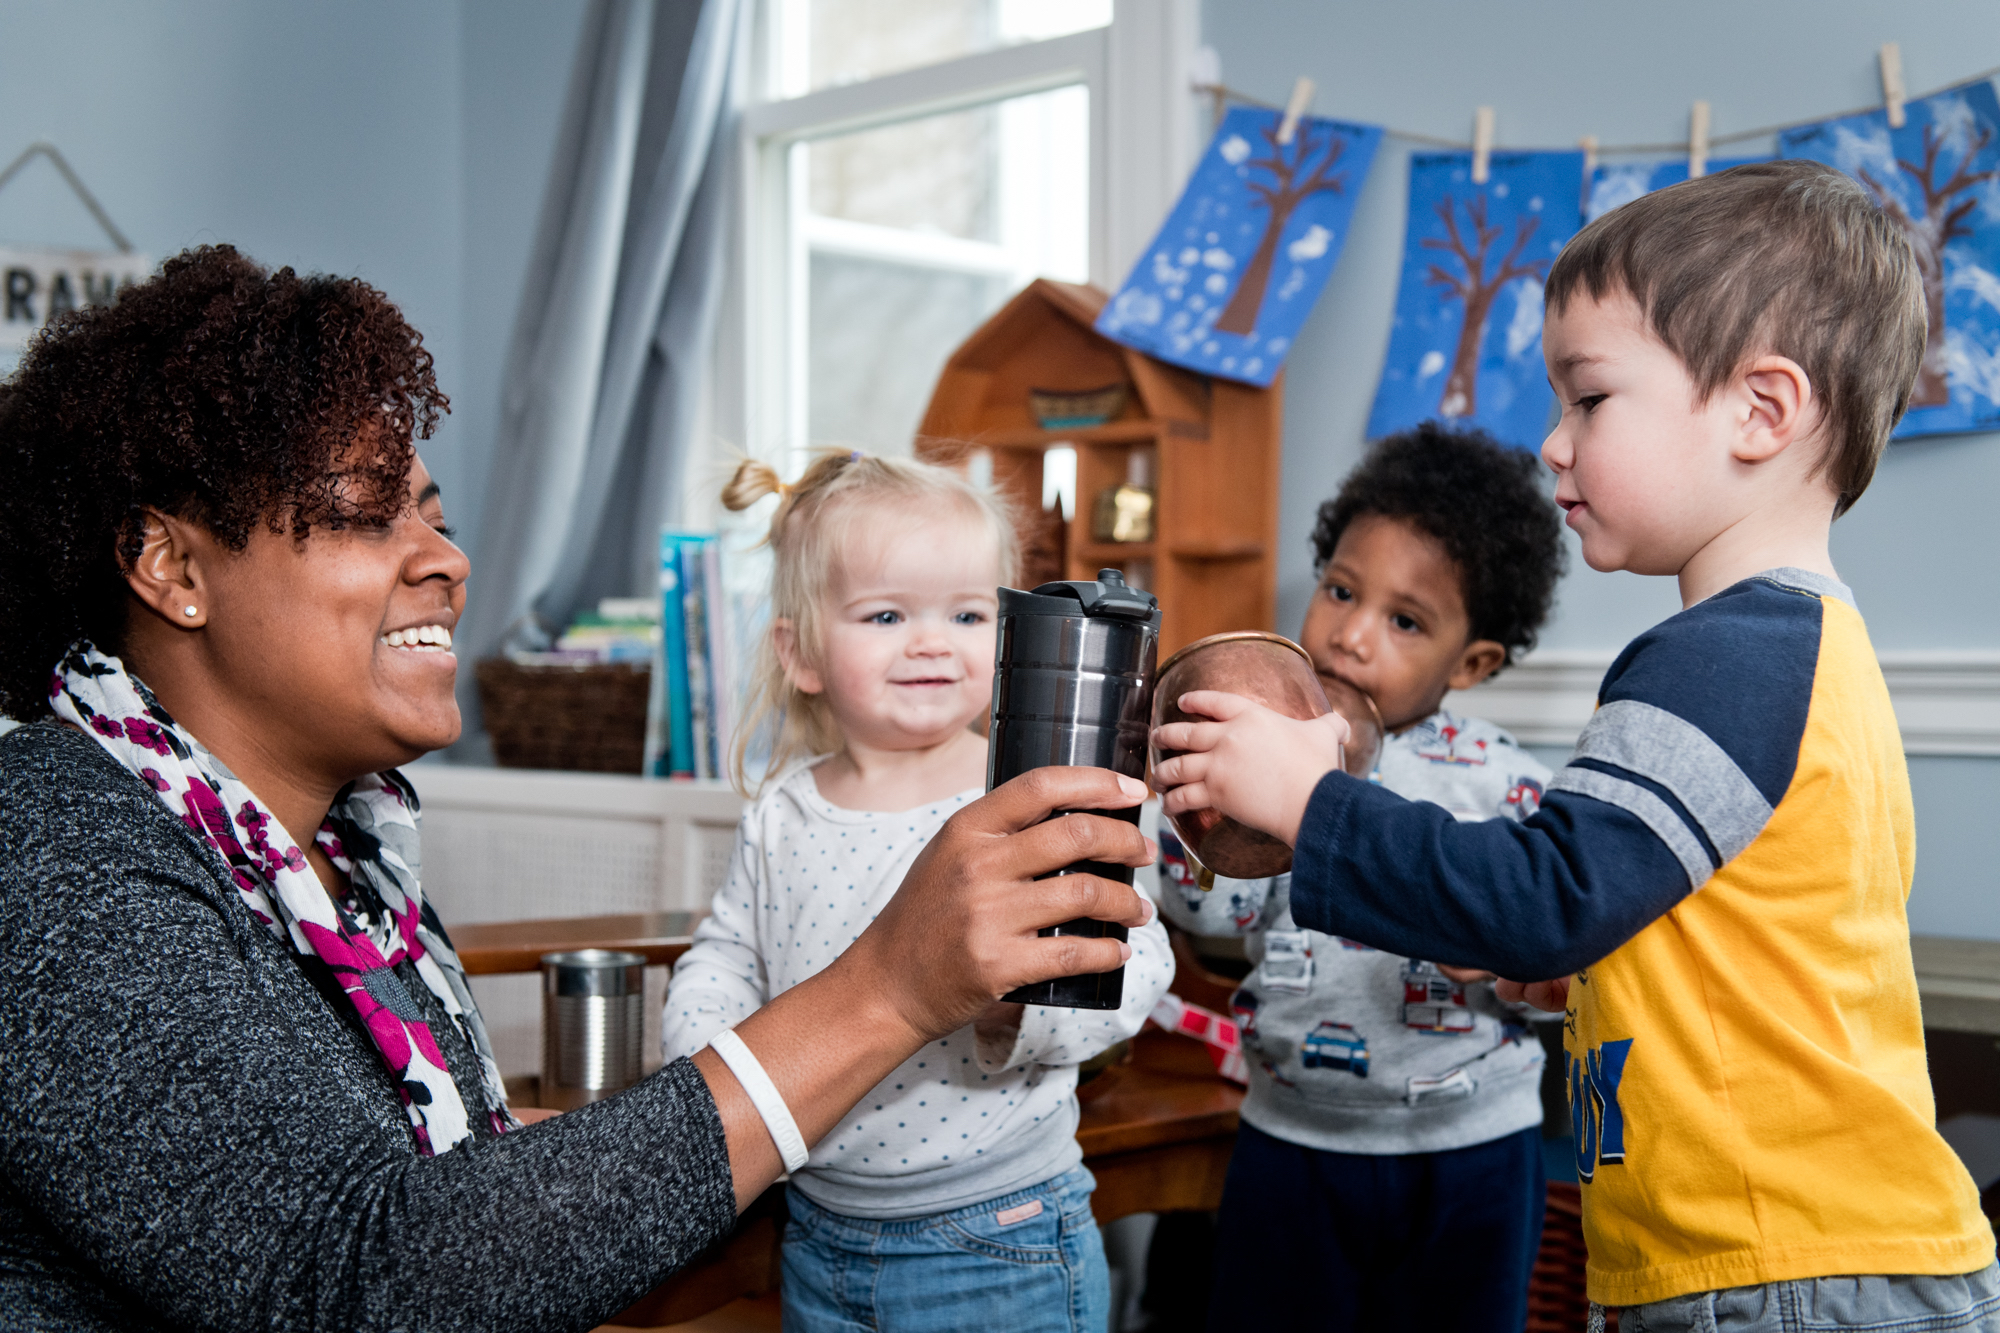 An image of a caregiver "toasting" mugs with a toddler